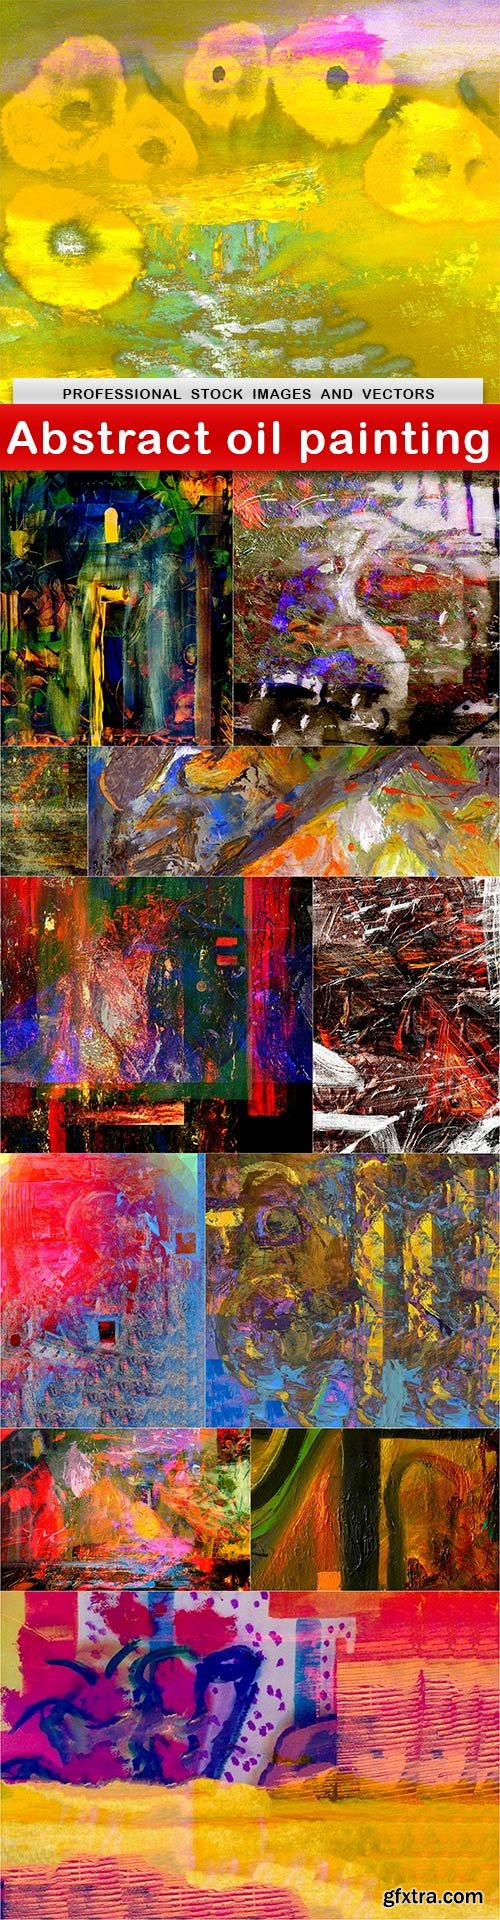 Abstract oil painting - 12 UHQ JPEG